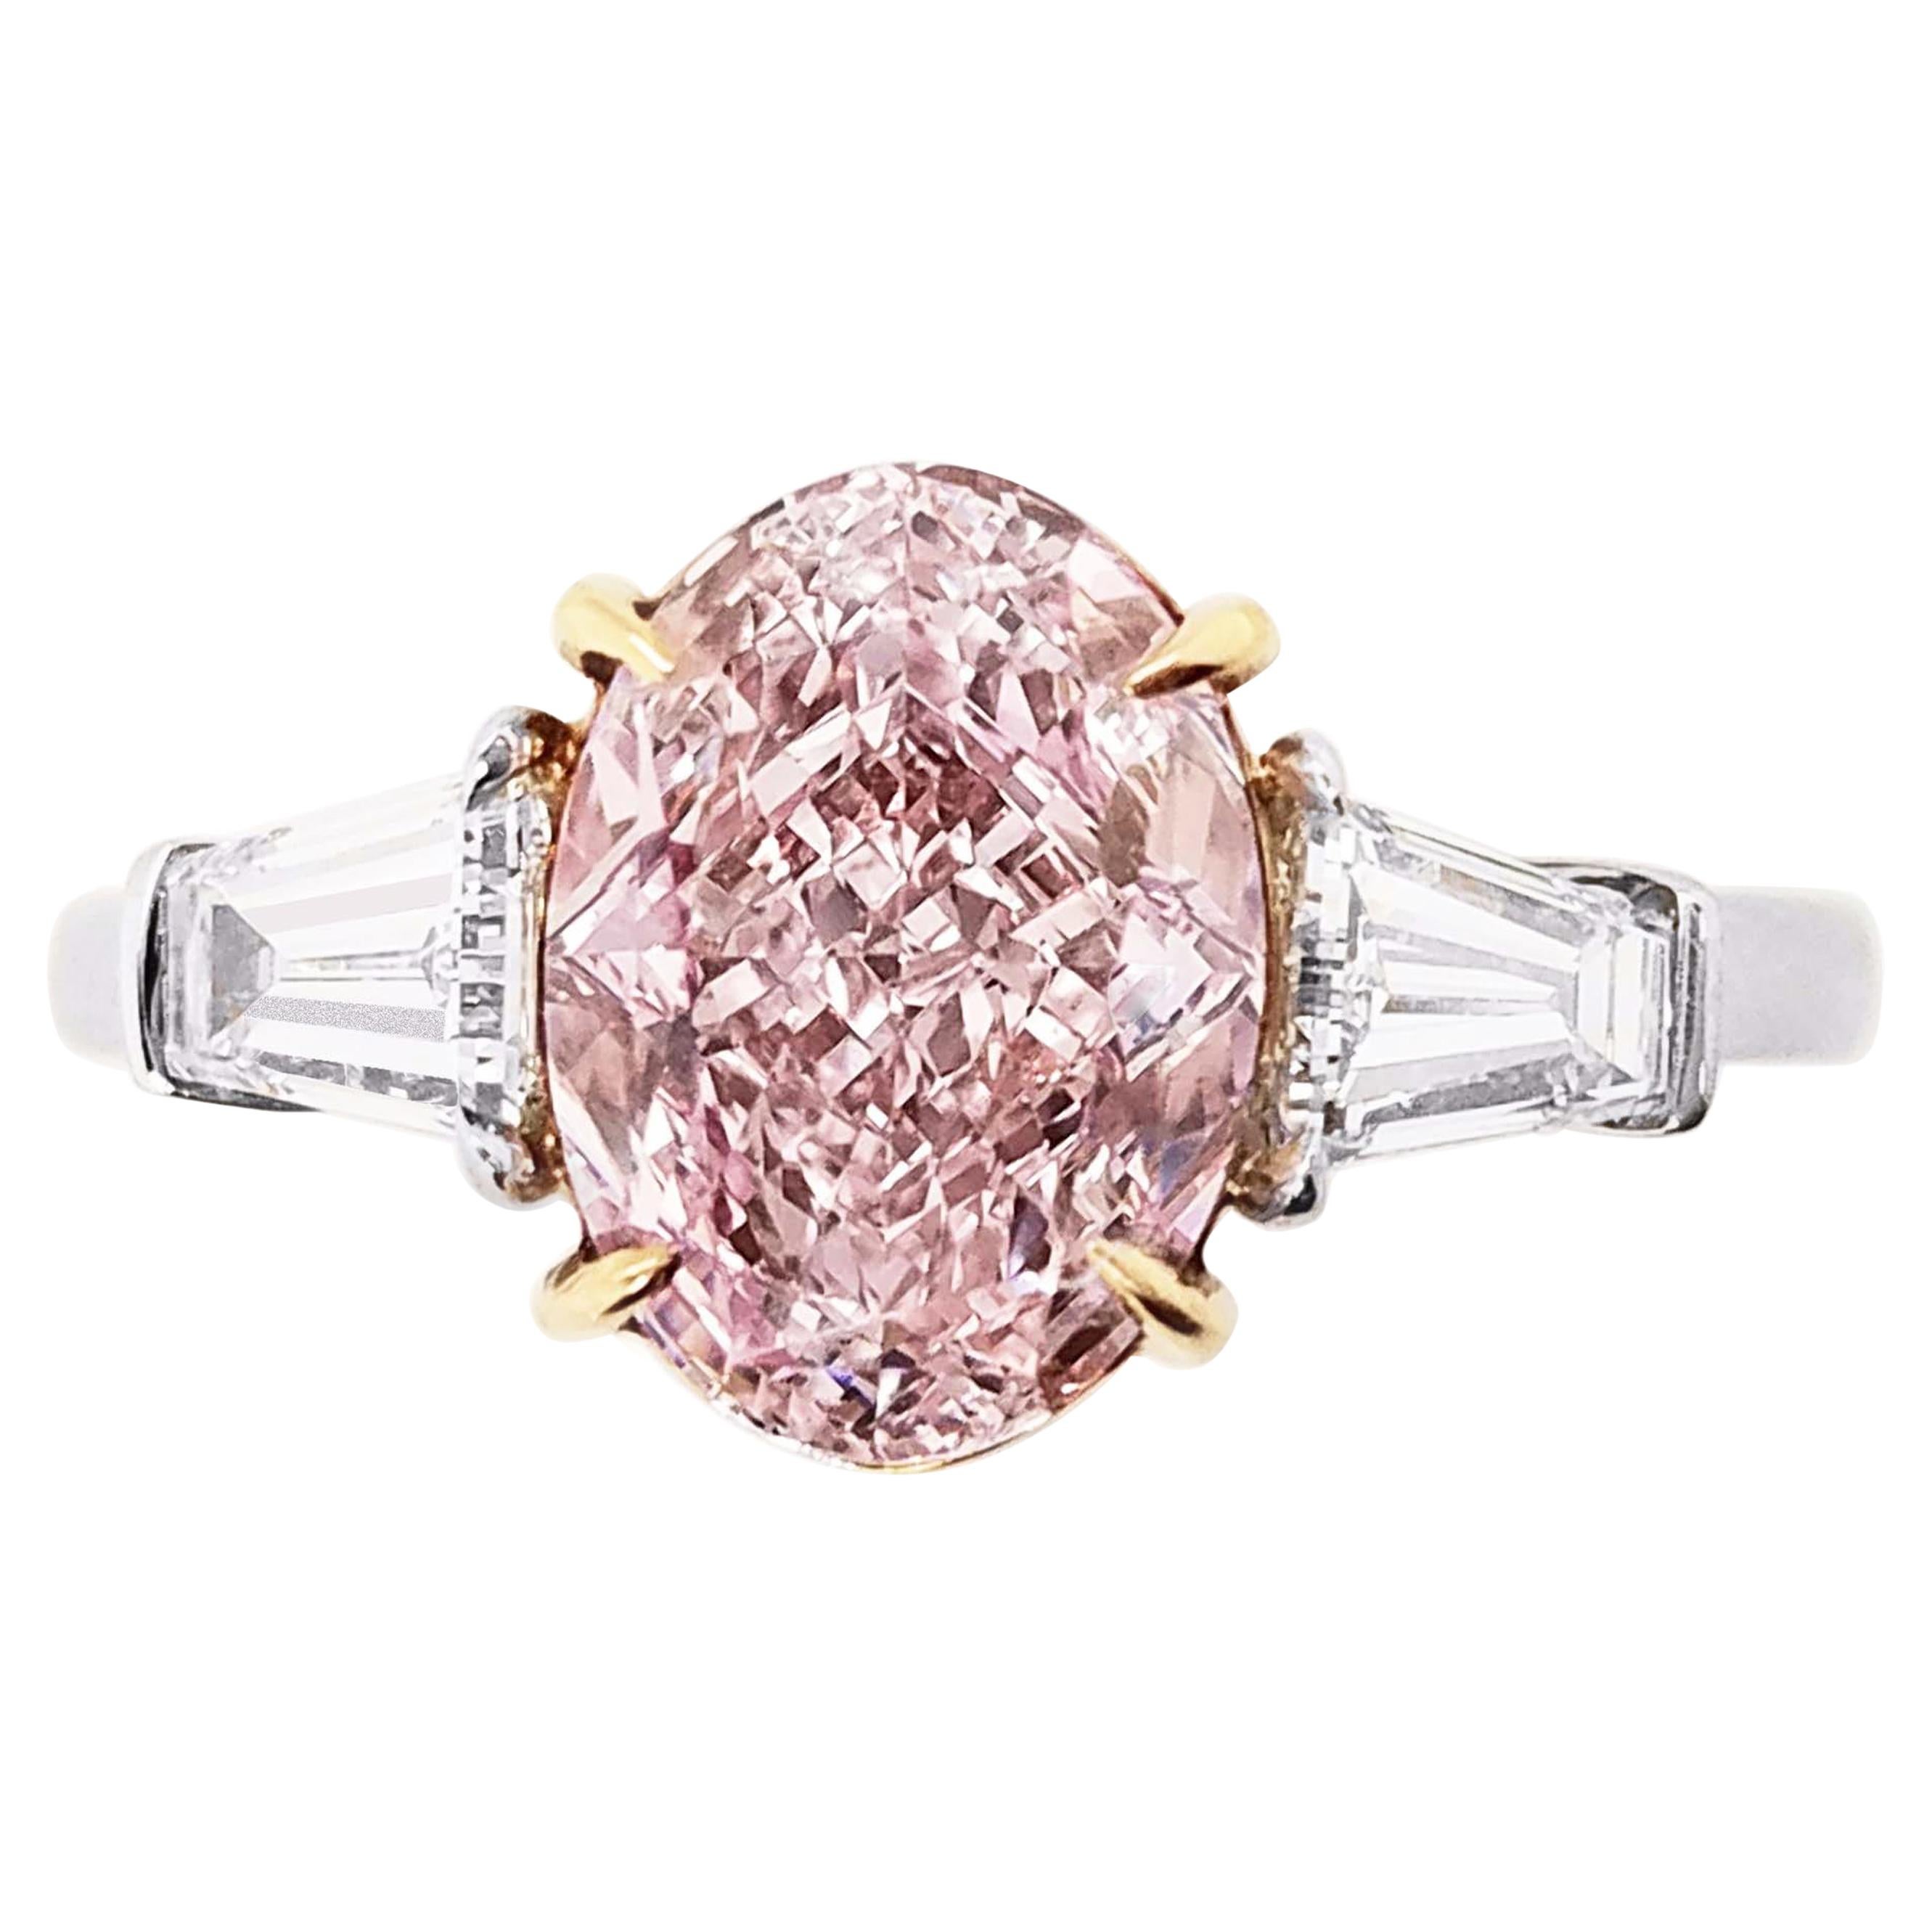 SCARSELLI 2 Carat Fancy Purple Pink Diamond Solitaire Ring GIA